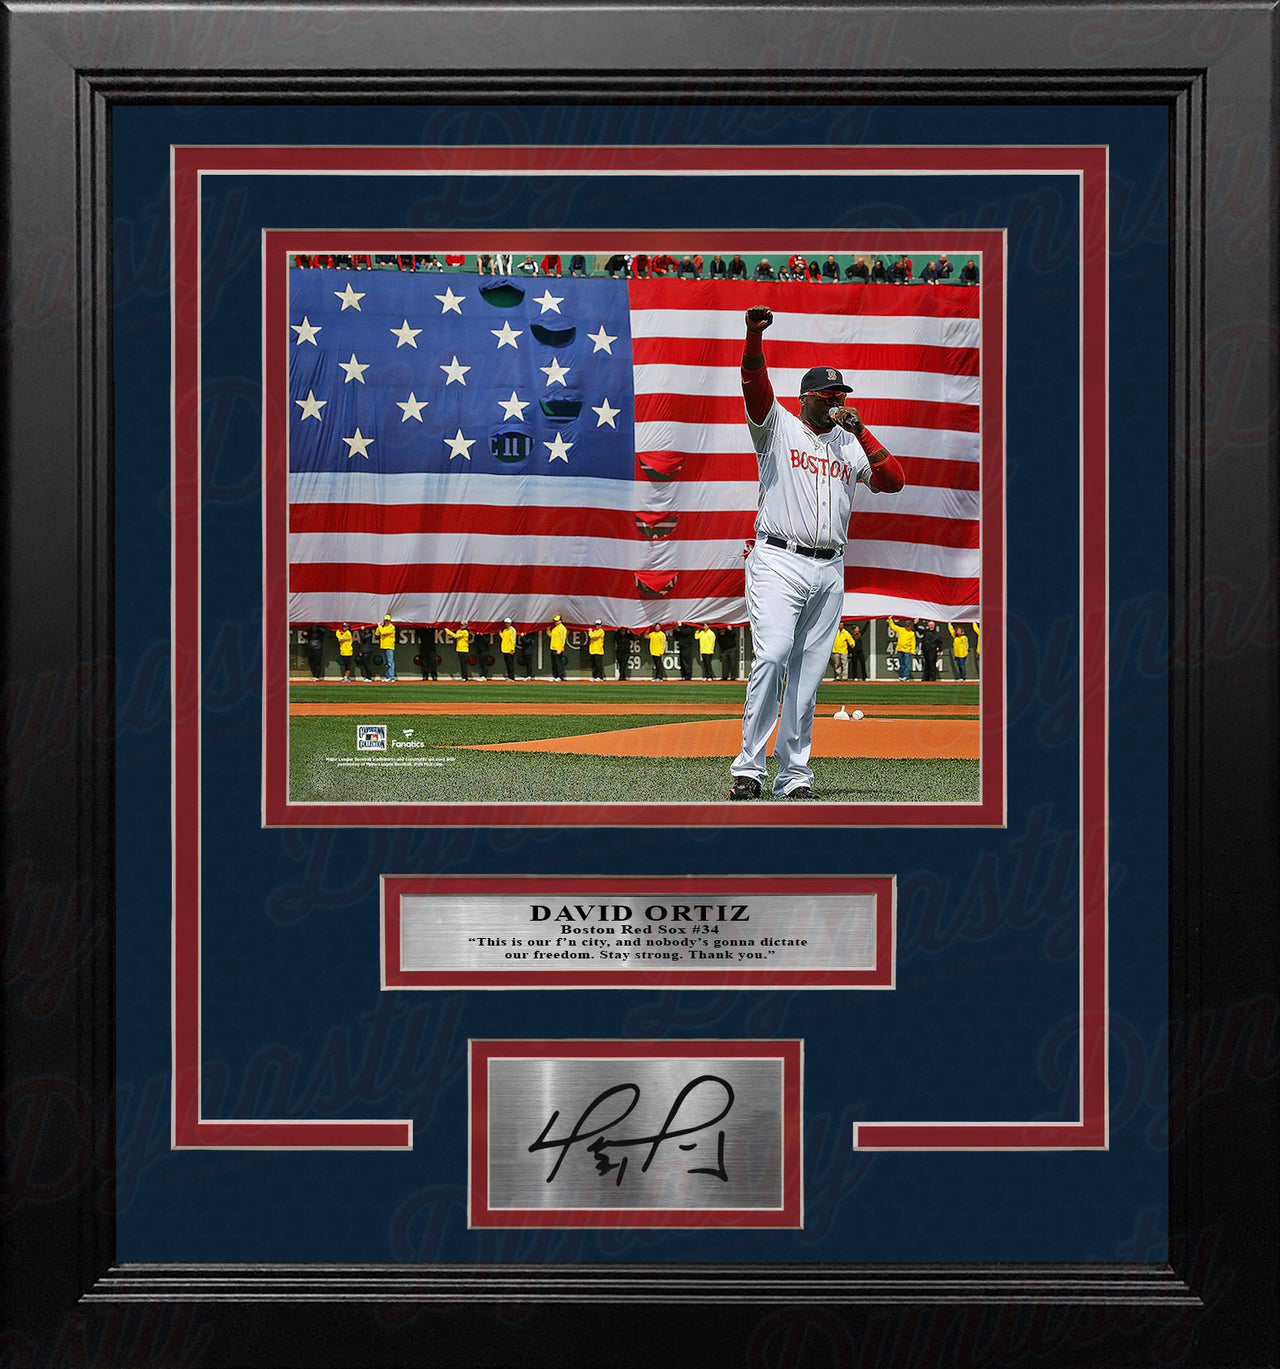 David Ortiz 2013 This is Our City Speech Boston Red Sox 8x10 Framed Photo with Engraved Autograph